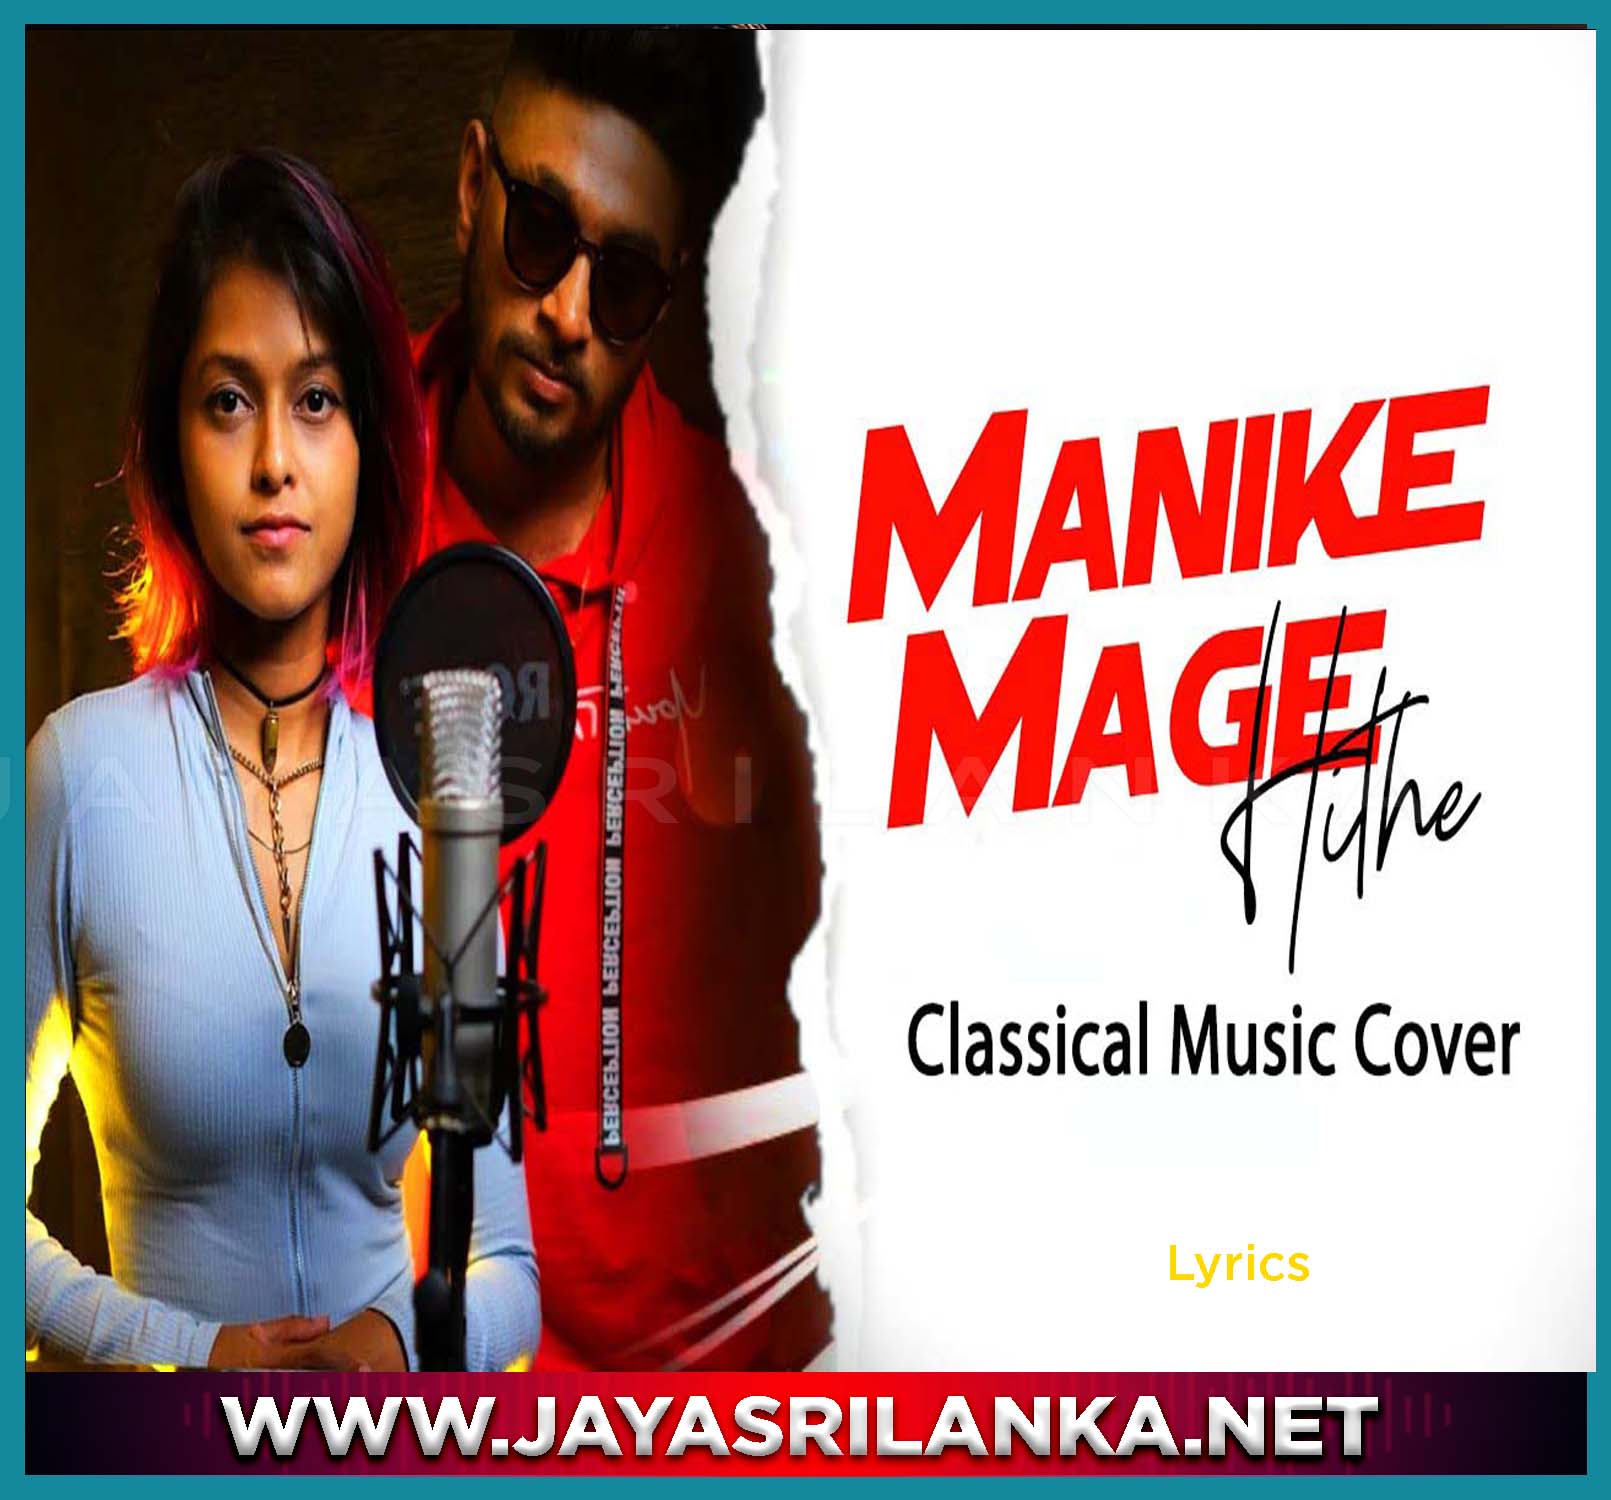 Manike Mage Hithe Classical Music Cover